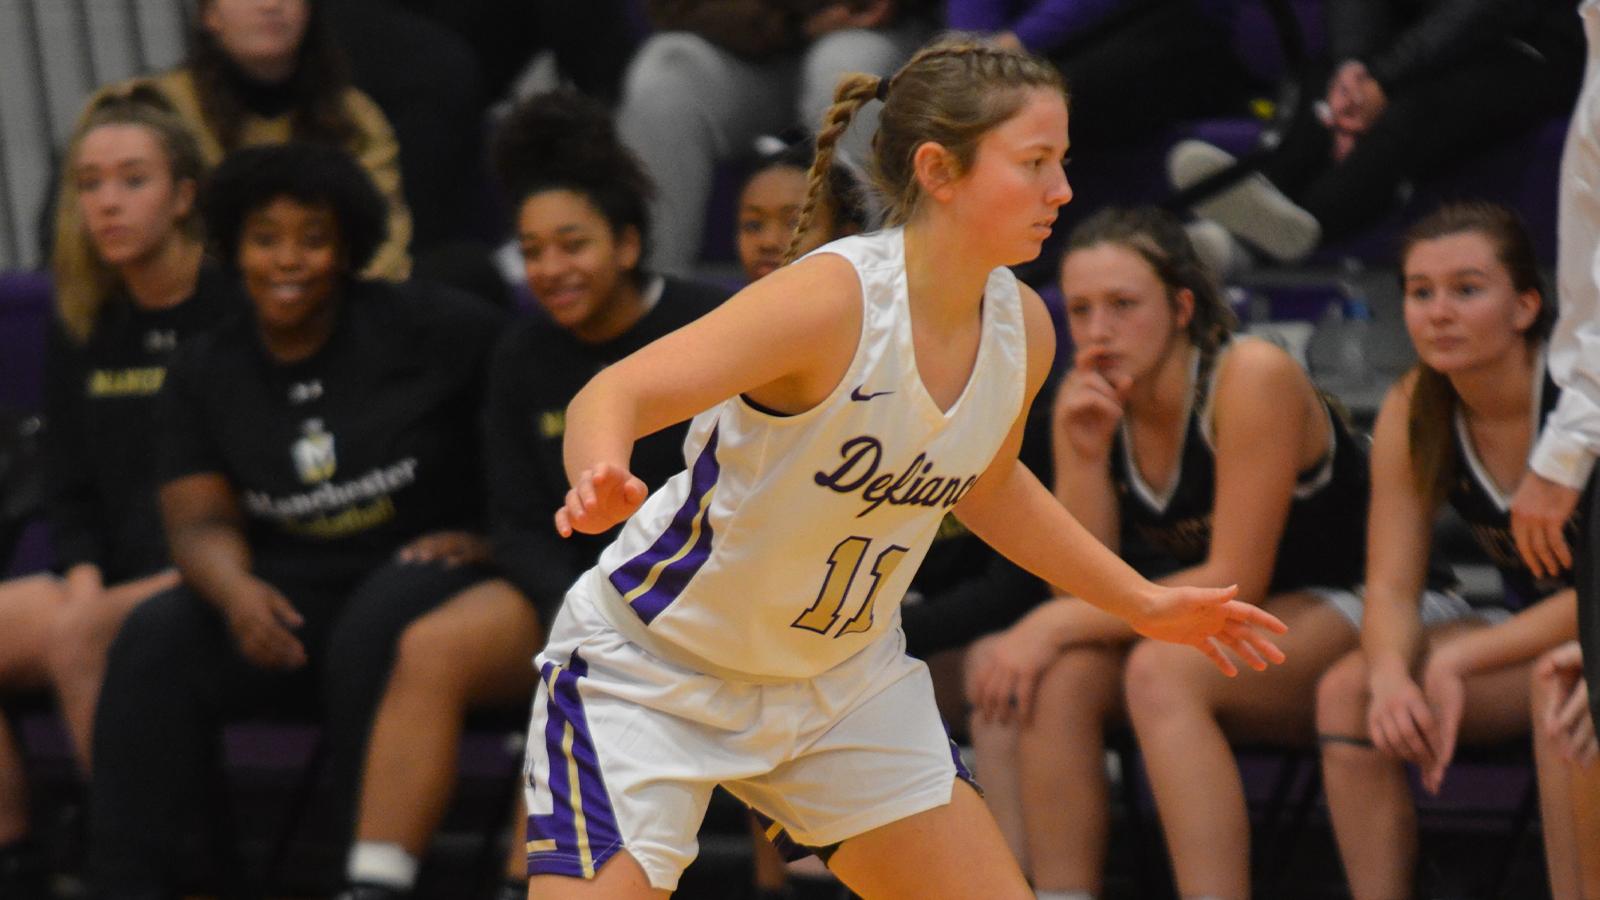 WBB Preview: Women's basketball wraps up string of road games Wednesday at Hiram